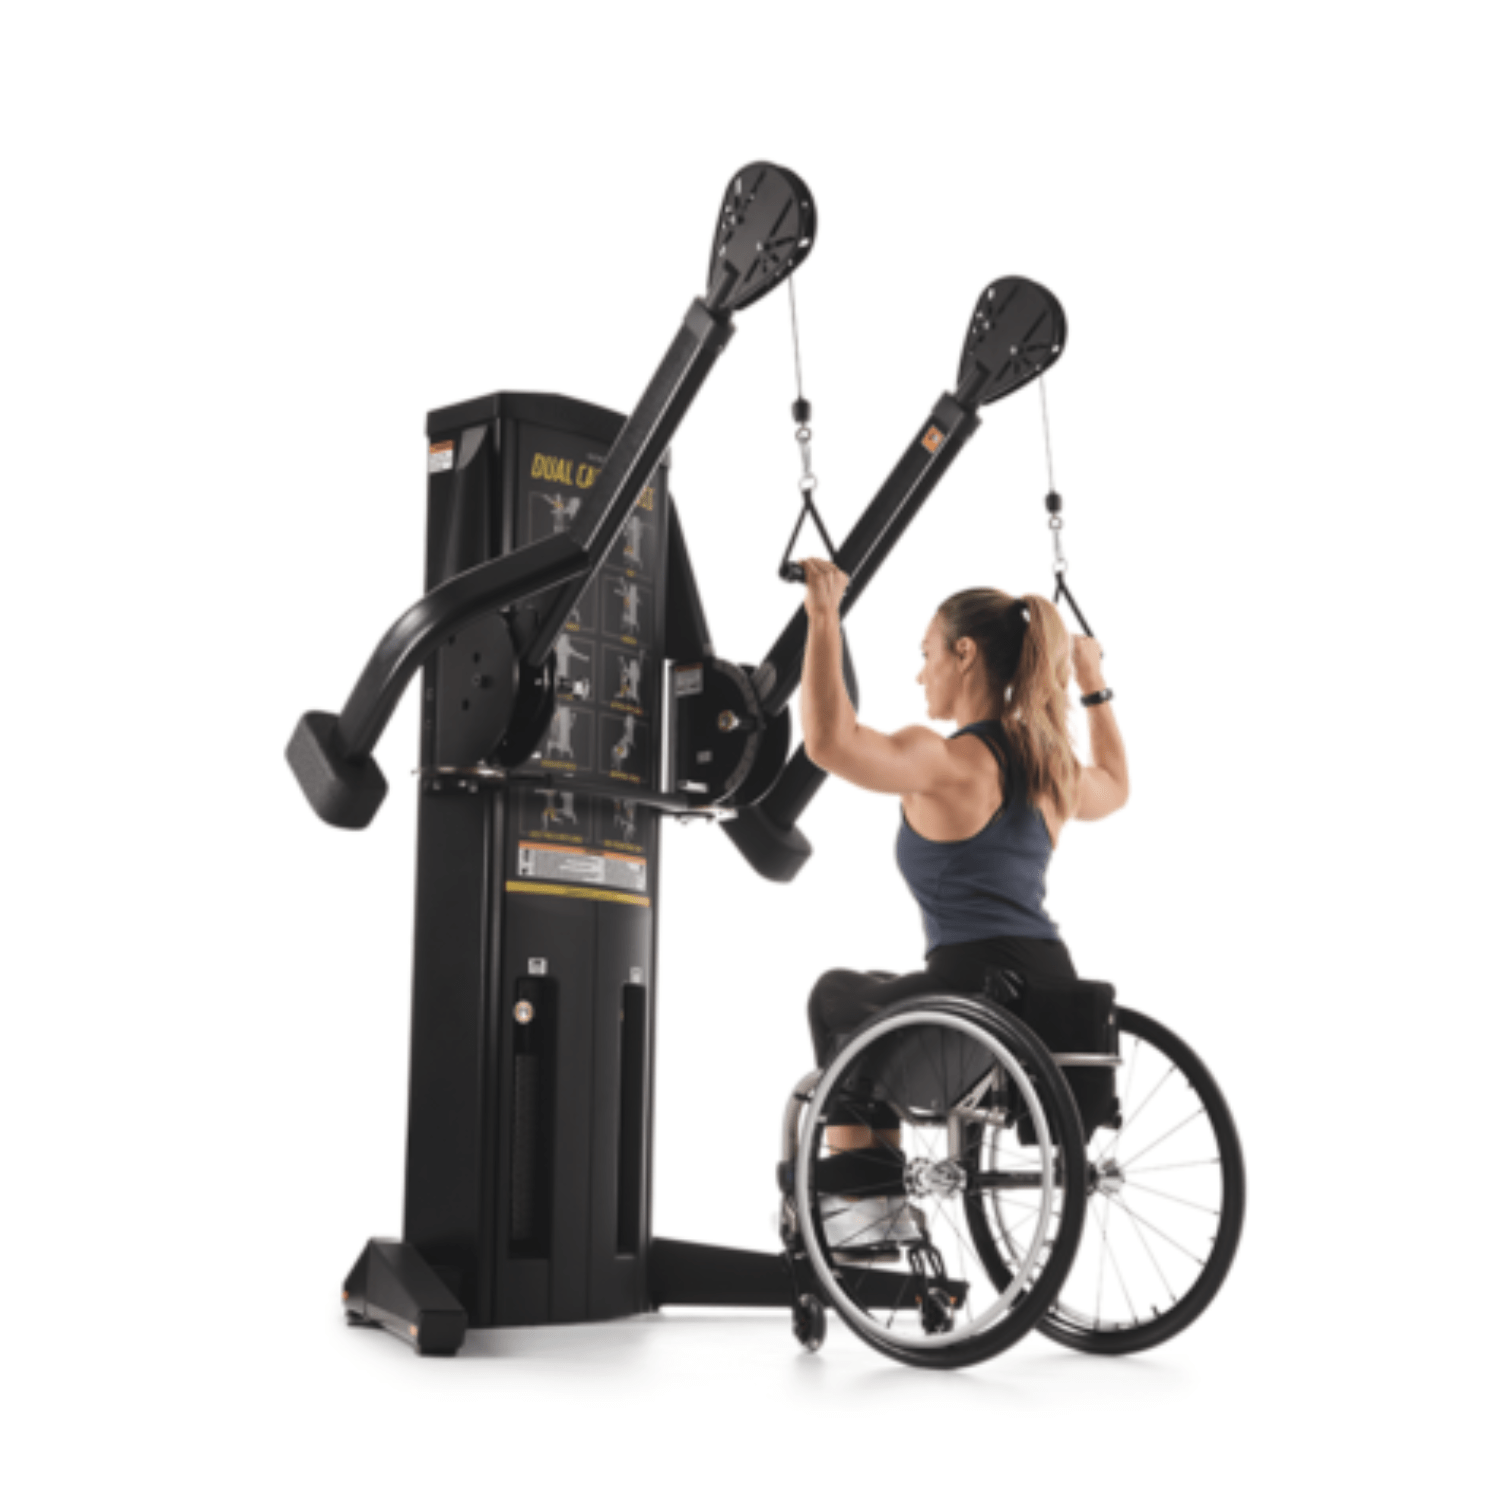 FreeMotion G624 Dual Cable Cross - Functional Trainer - FreeMotion - 7